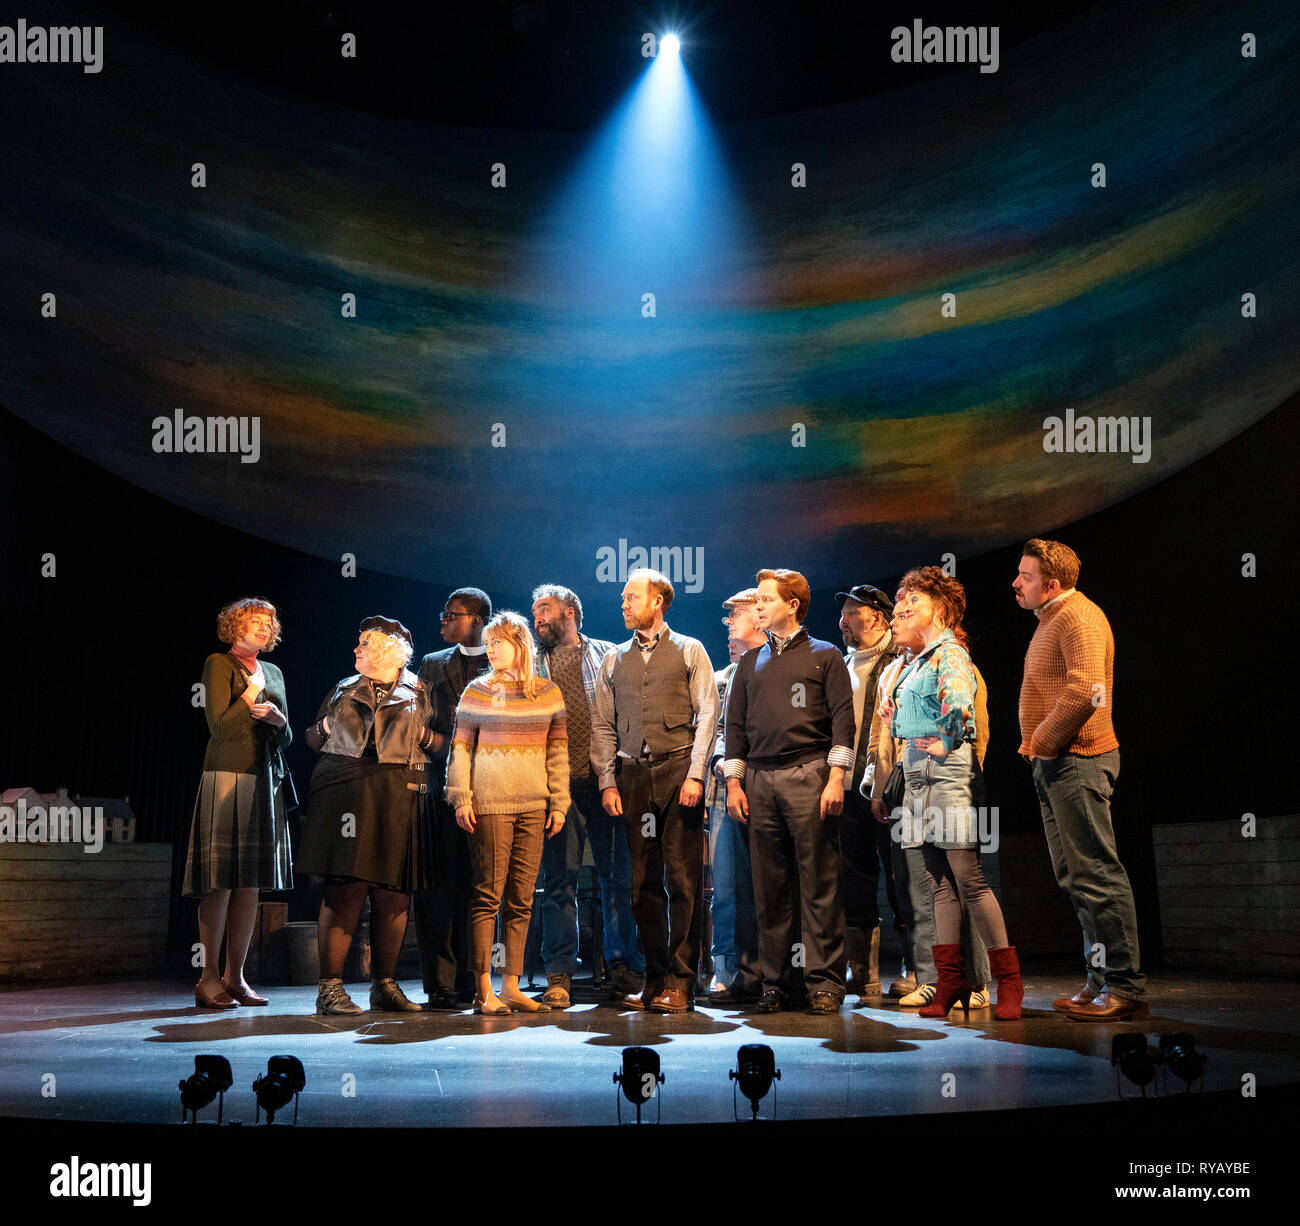 Edinburgh, Scotland, UK. 13th Mar, 2019. Photo call of World Premiere of Local Hero stage adaptation at Royal Lyceum Theatre in Edinburgh. Musical adaptation written by Bill Forsyth and David Grieg with new music by Mark Knopfler, directed by John Crowley. Credit: Iain Masterton/Alamy Live News Stock Photo